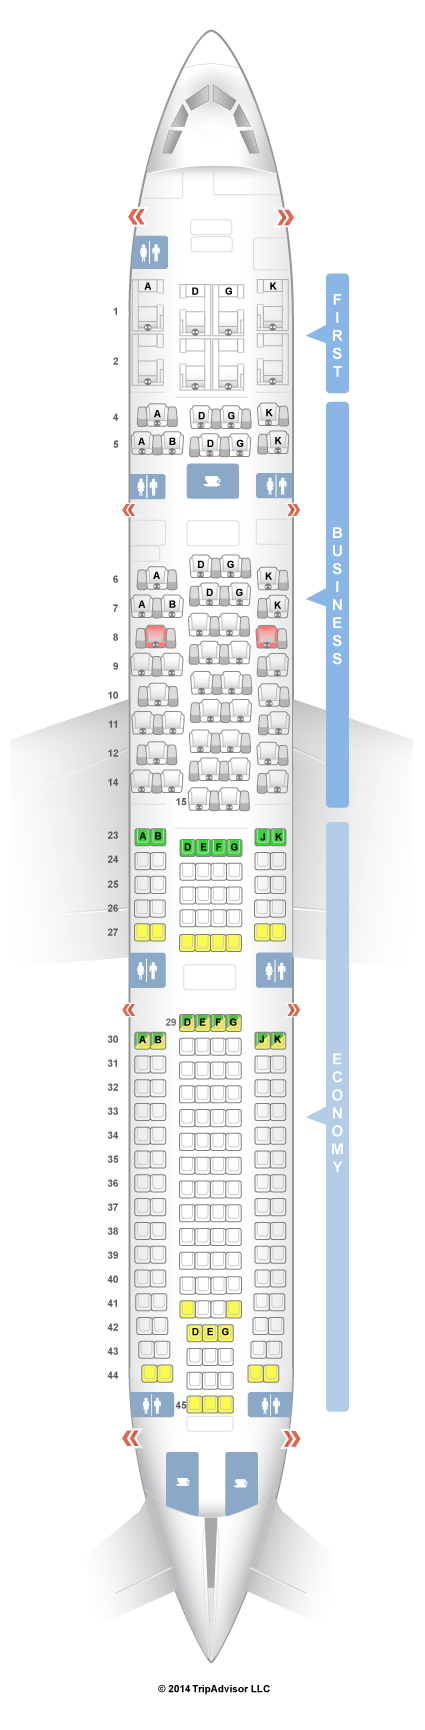 Aer Lingus A330 300 Seating Chart